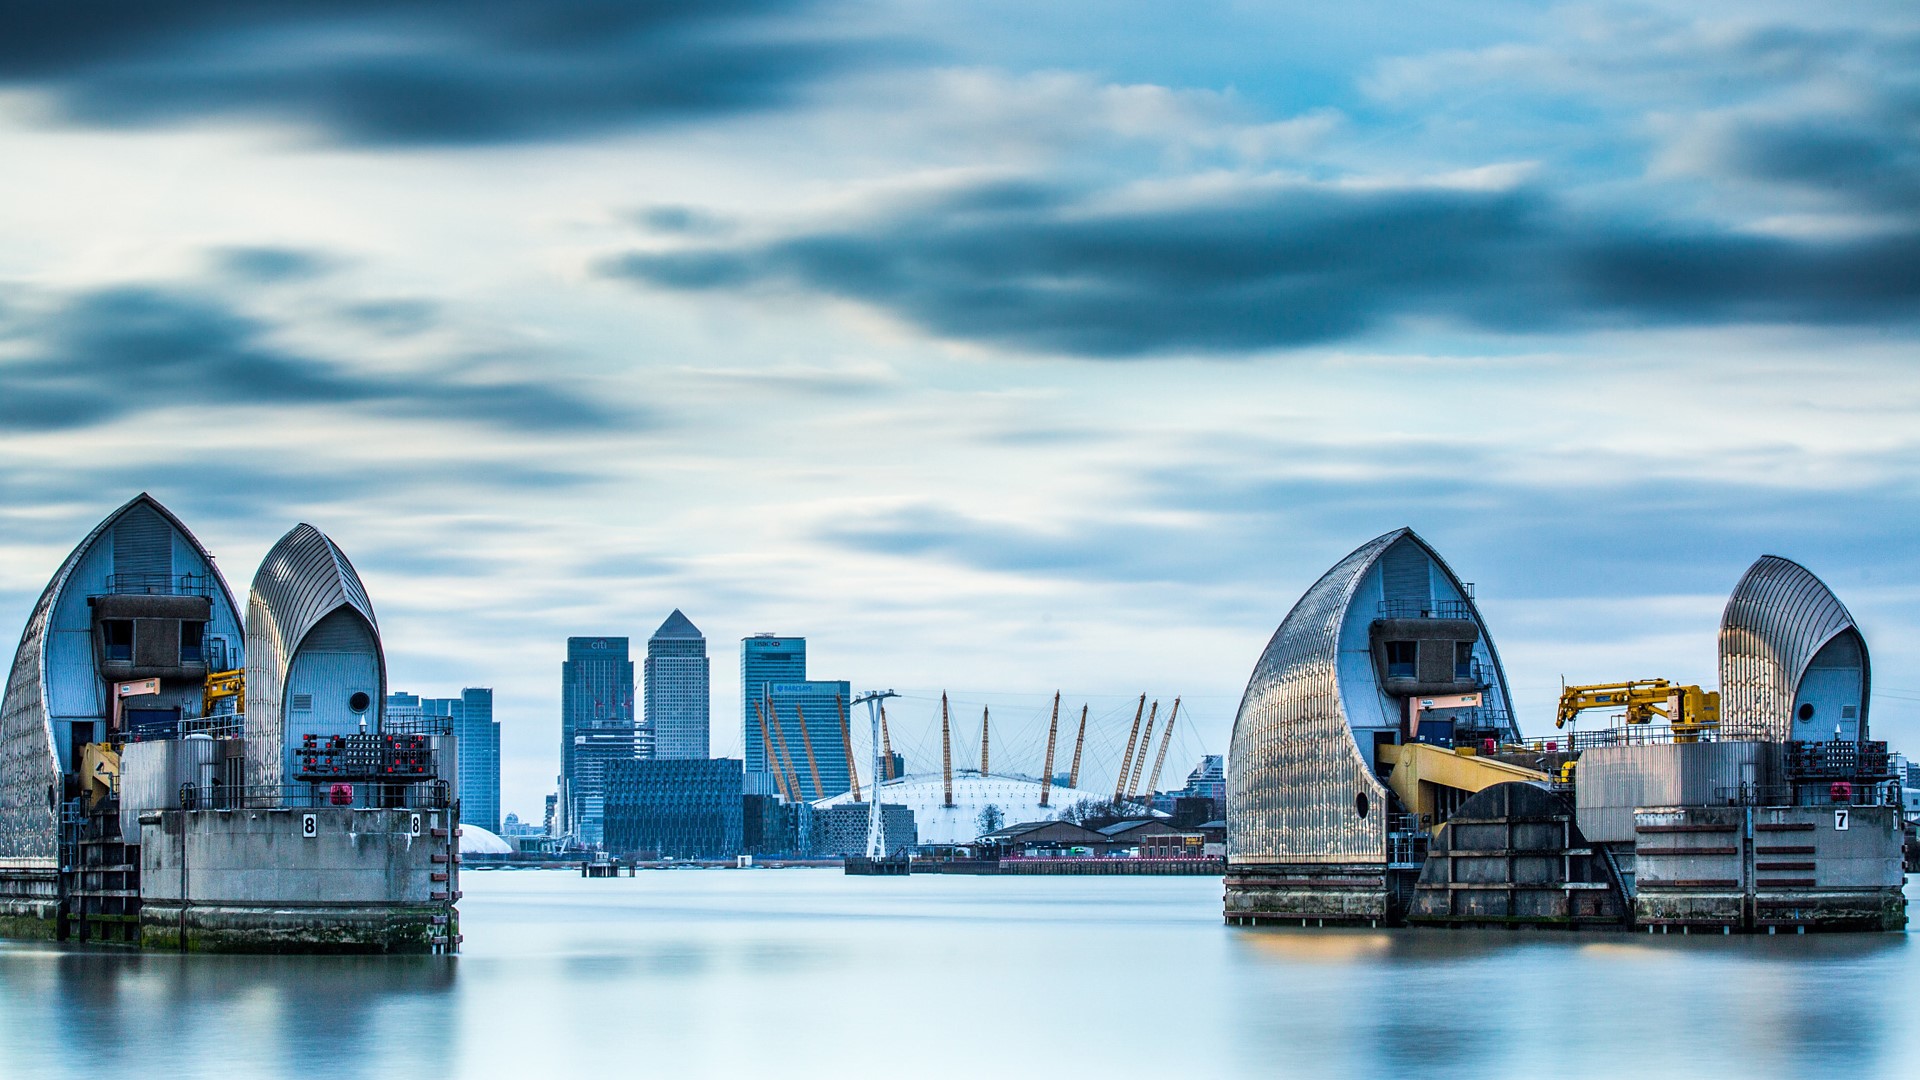 Thames Barrier On River And Canary Wharf In The Background